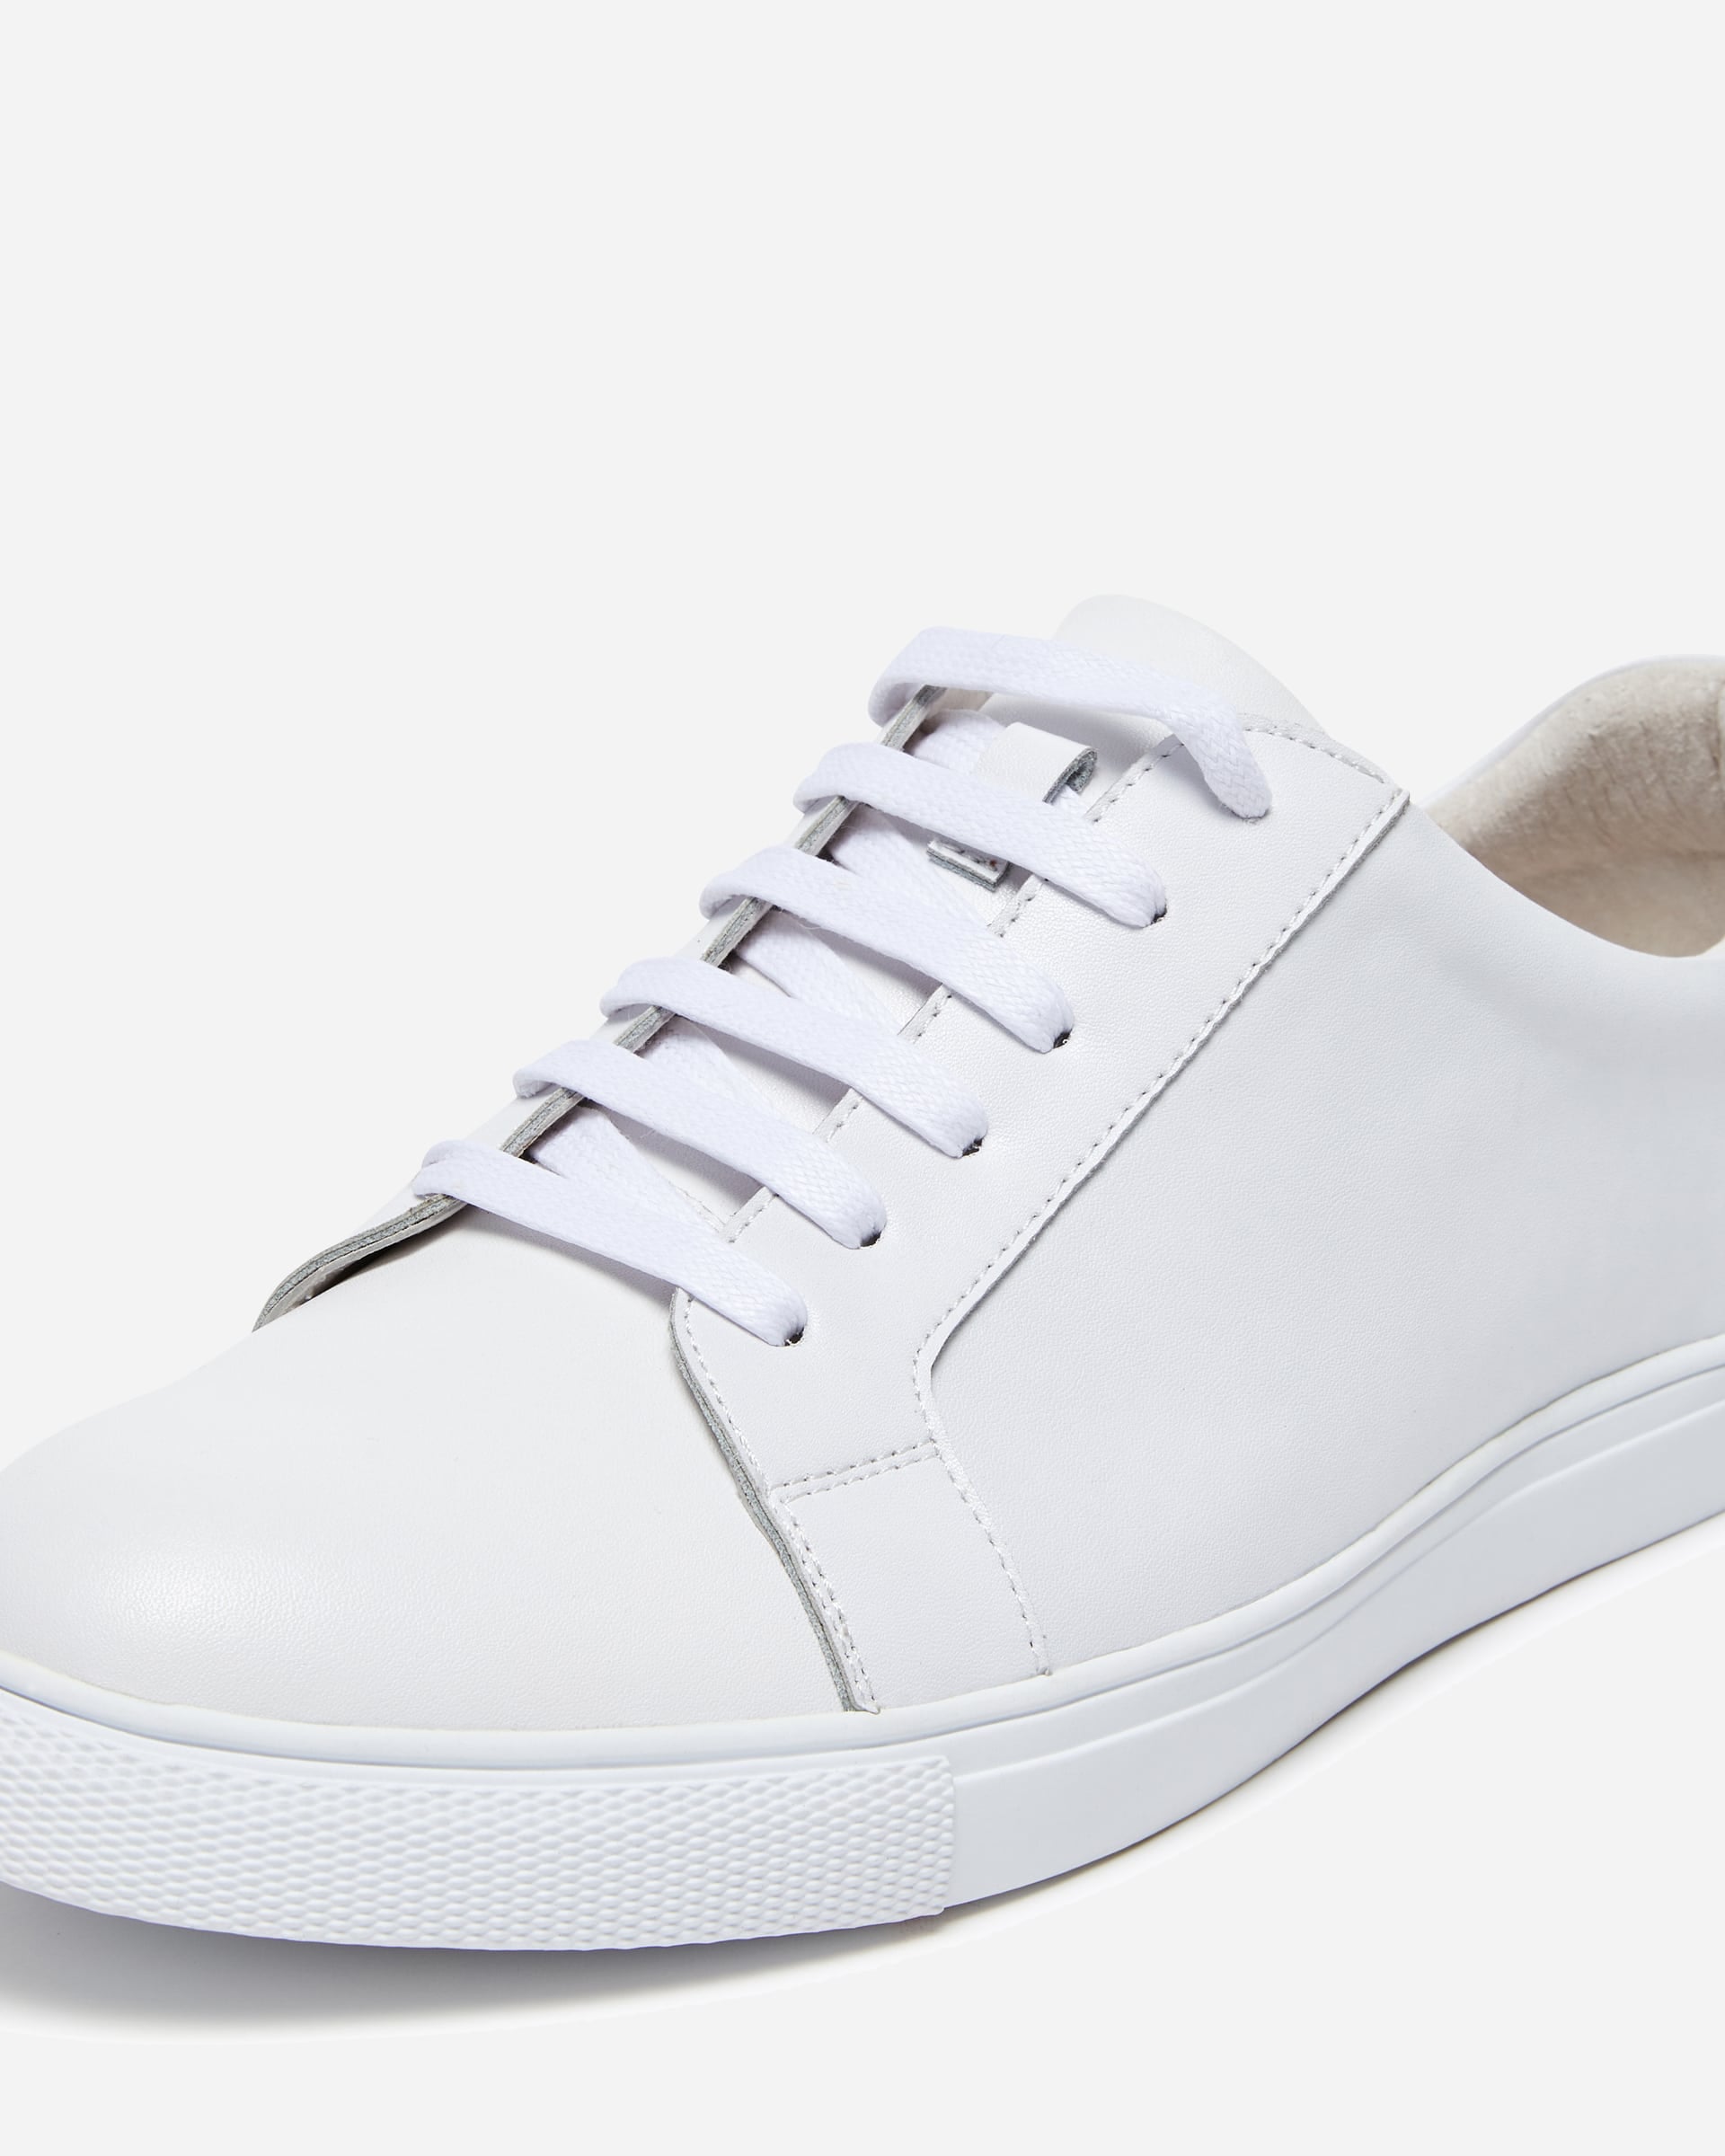 Grove White Sneaker - Men's Shoes at Menzclub